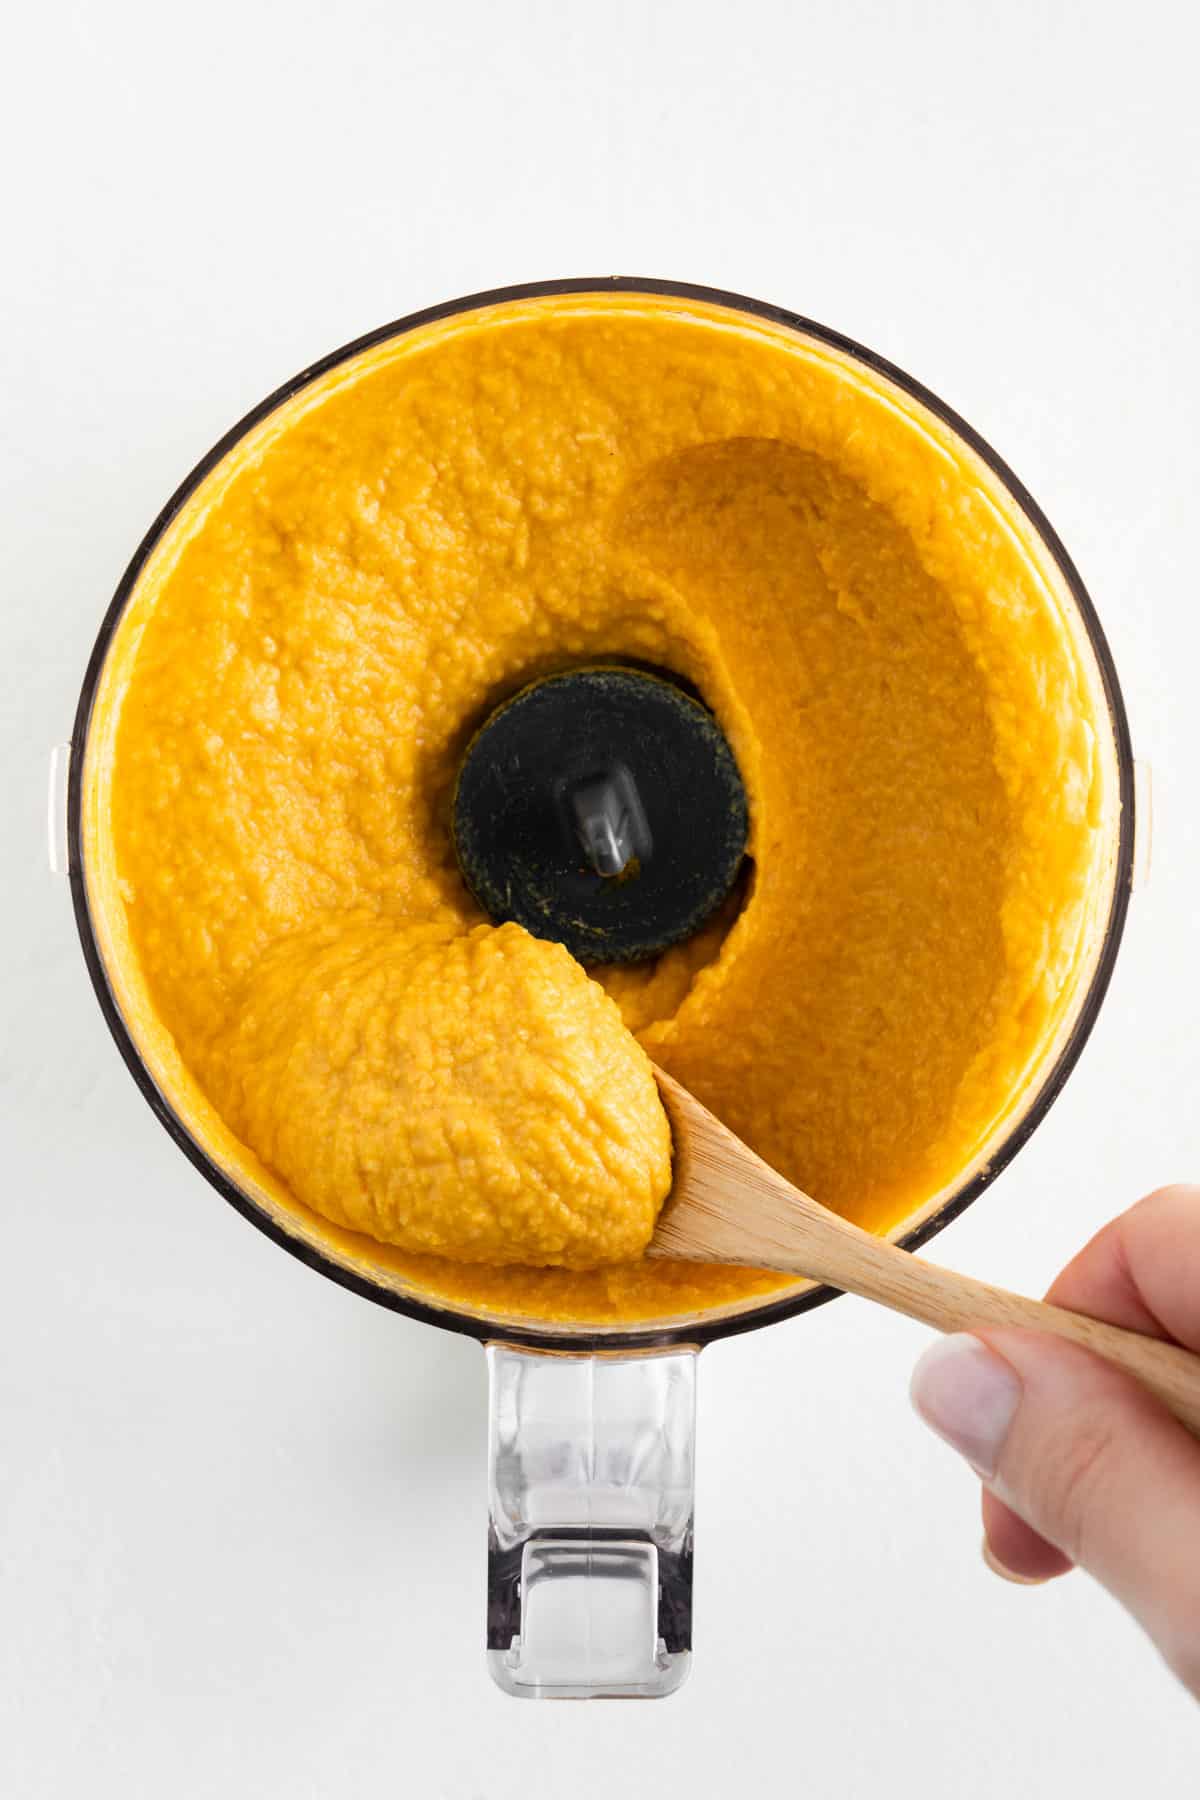 a hand holding a wooden spoon scooping pumpkin hummus inside the bowl of a food processor